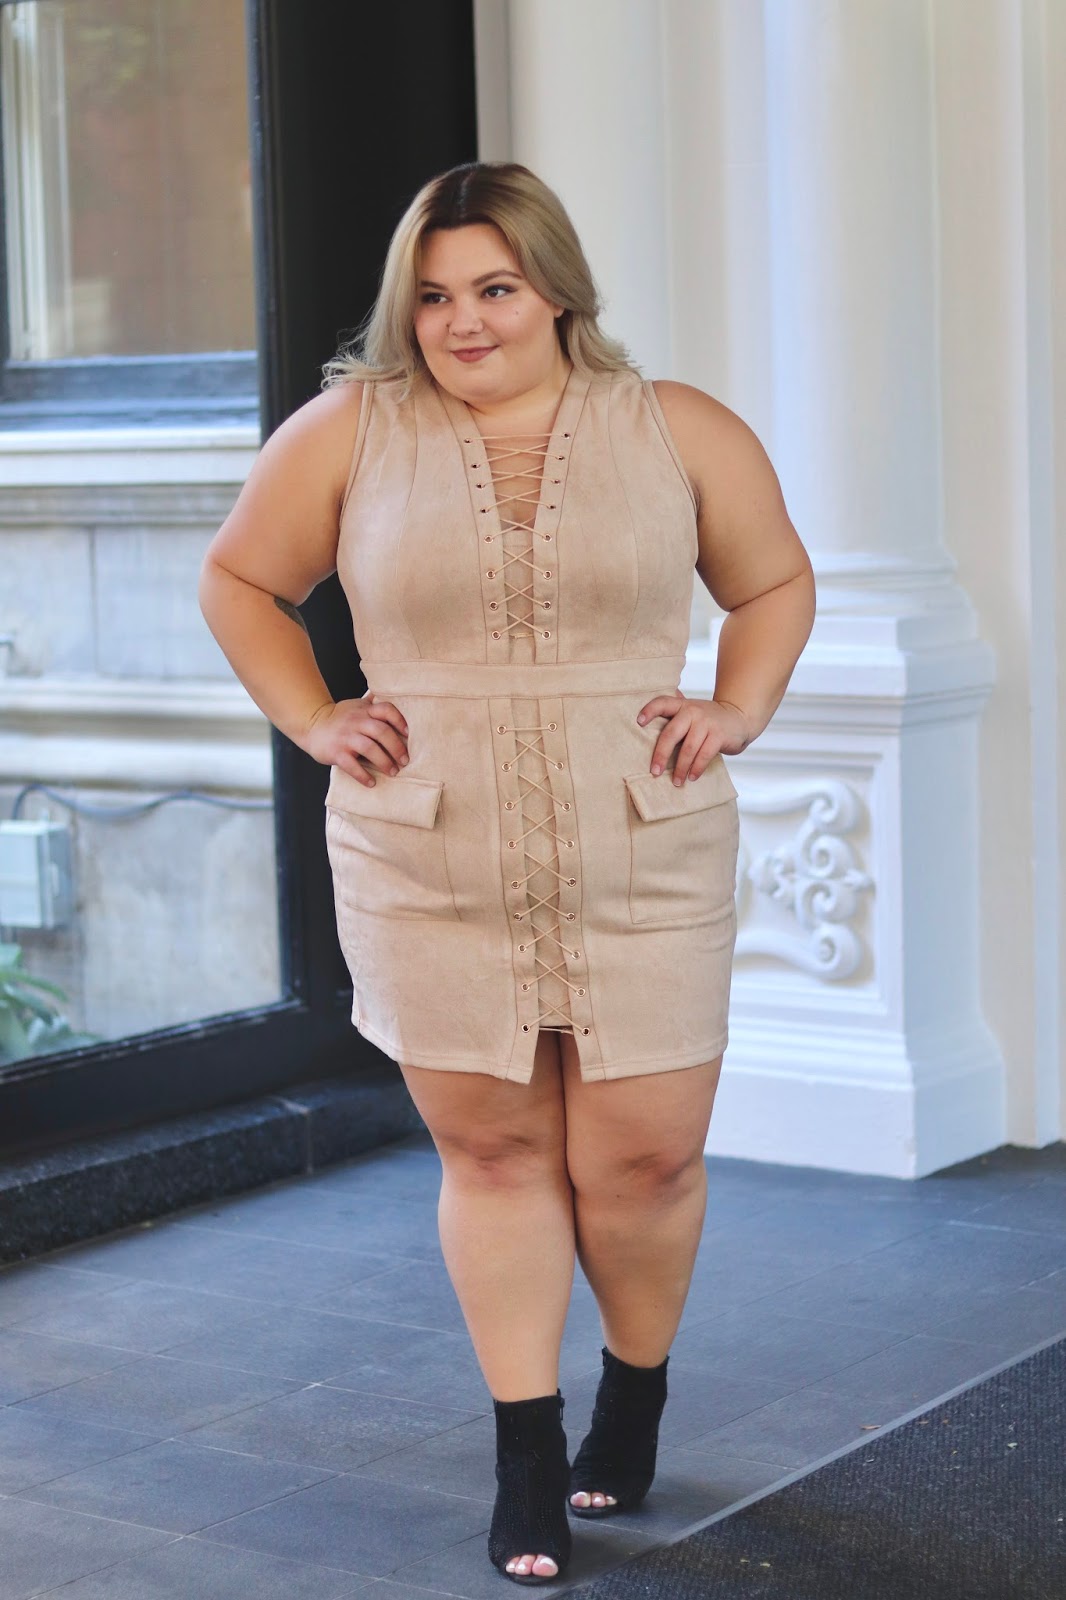 plus size fashion, affordable plus size clothing, petite plus size, sexy plus size clothing, Chicago fashion blogger, midwest blogger, Natalie Craig, Natalie in the city, nat in the city, plus size, curvy clothes, fashion nova, fashion nova curve, blogger review, curves and confidence